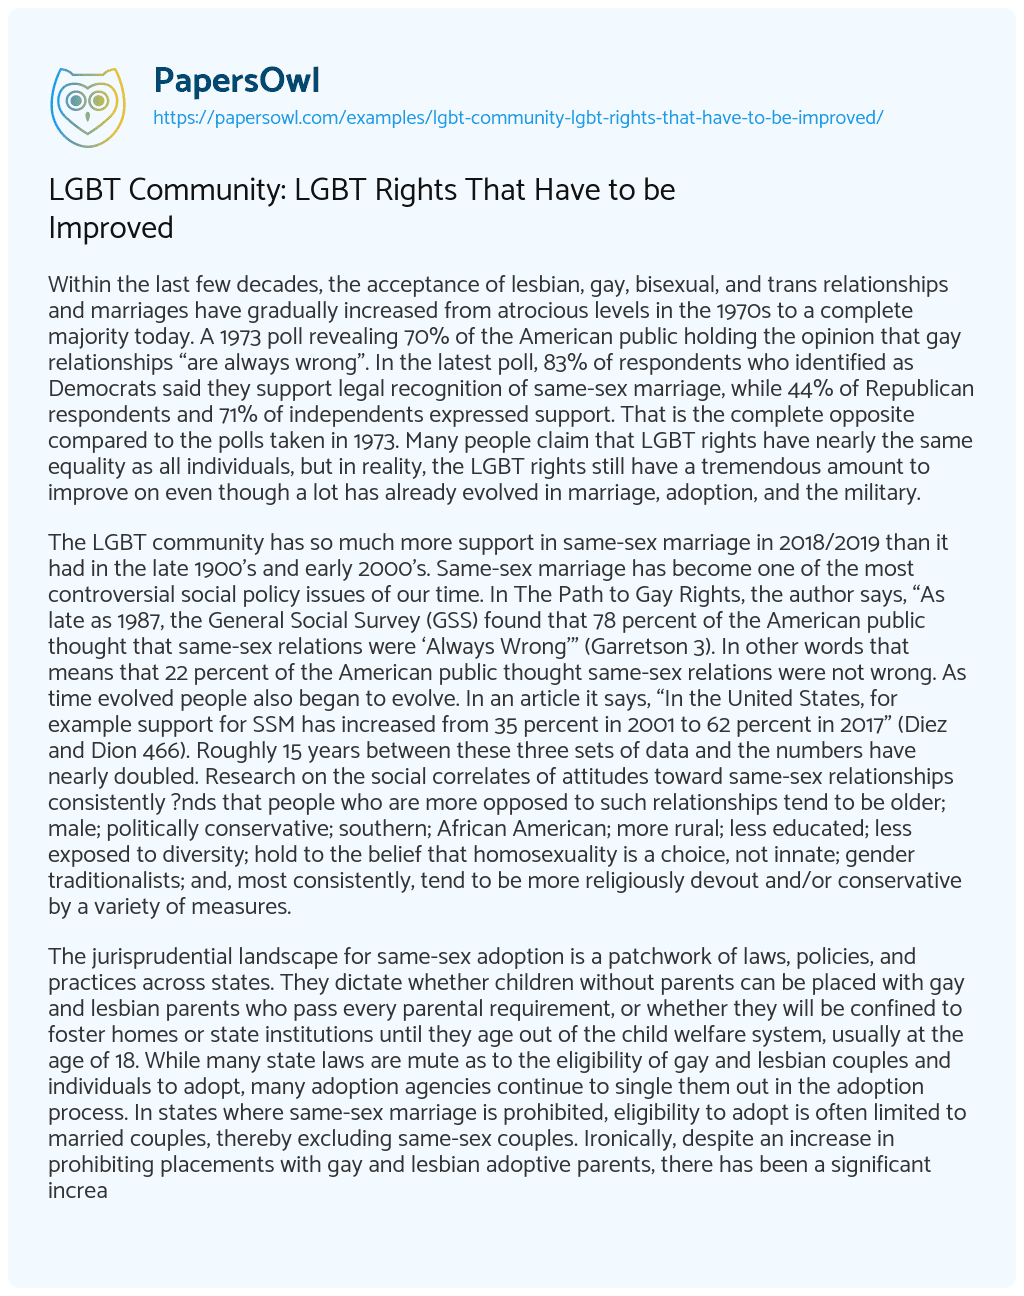 LGBT Community: LGBT Rights that have to be Improved essay